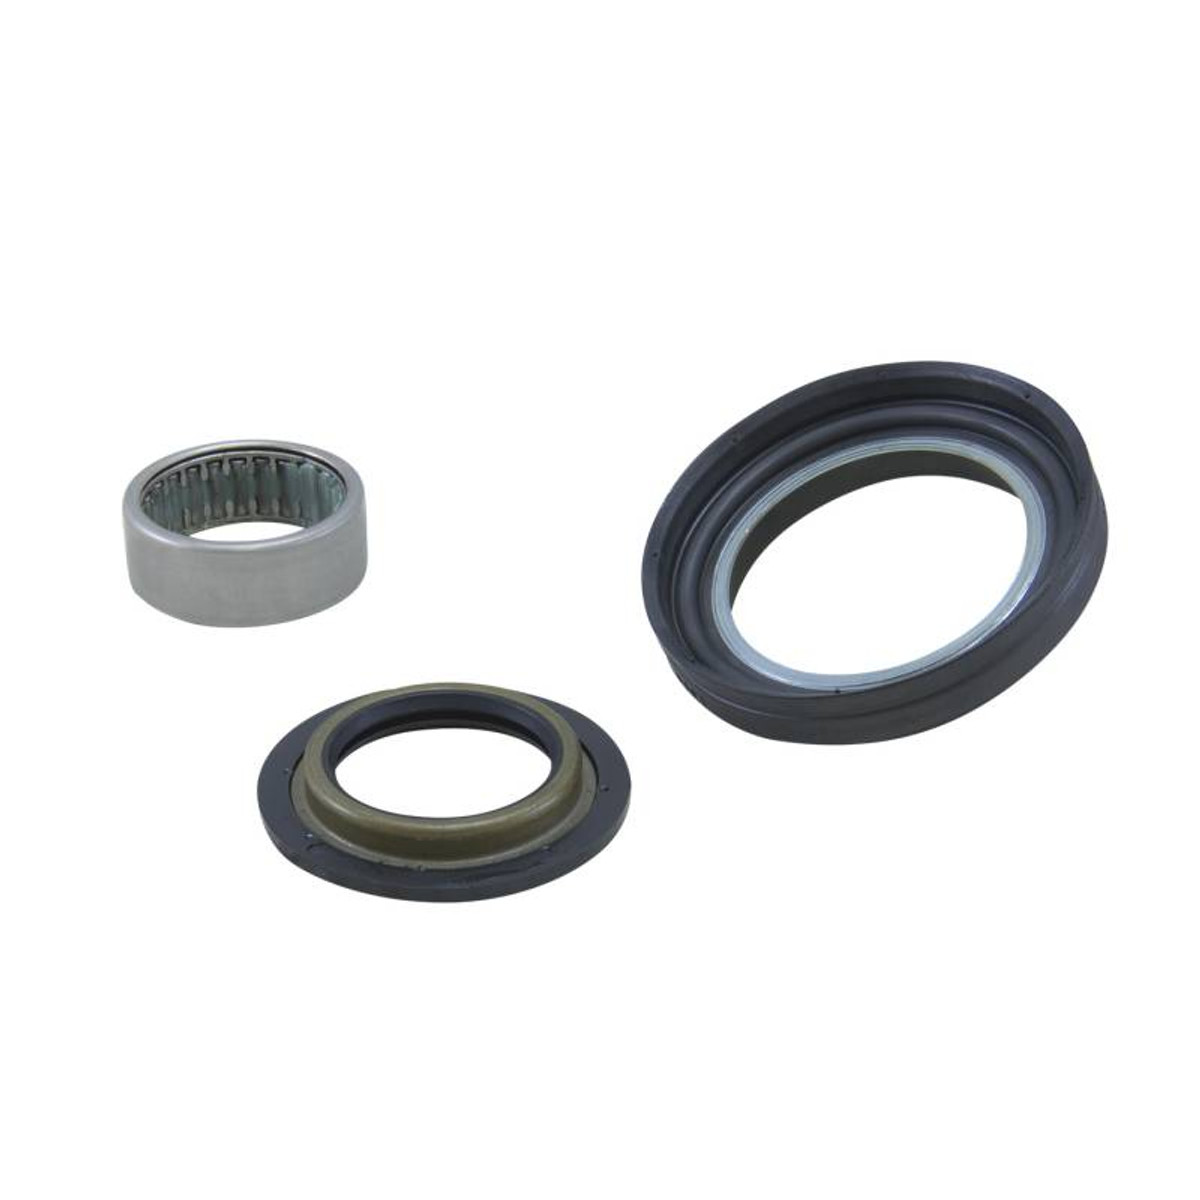 Spindle Bearing And Seal Kit For 93-96 Ford Dana28 Model 35 IFS And Dana 44 IFS YSPSP-029